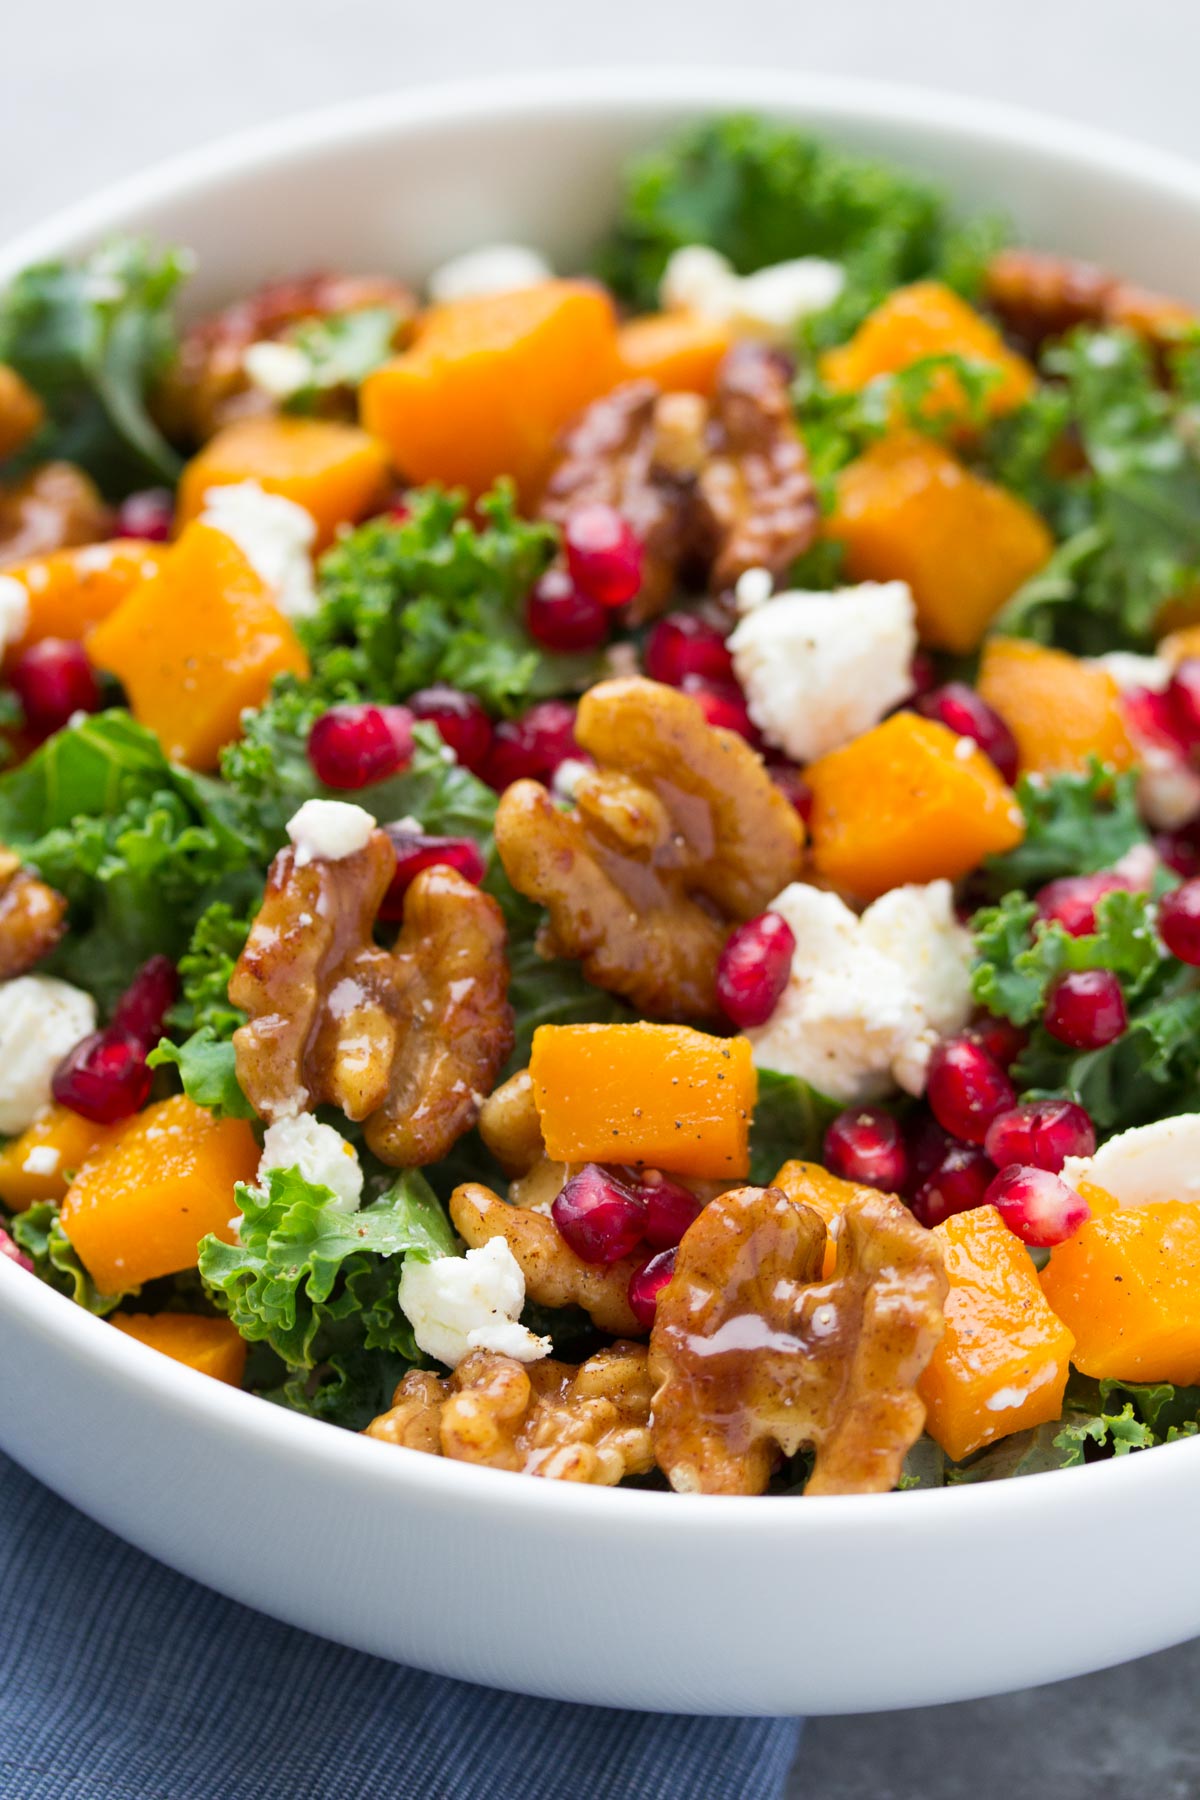 butternut squash salad with kale, candied walnuts, pomegranate seeds and goat cheese